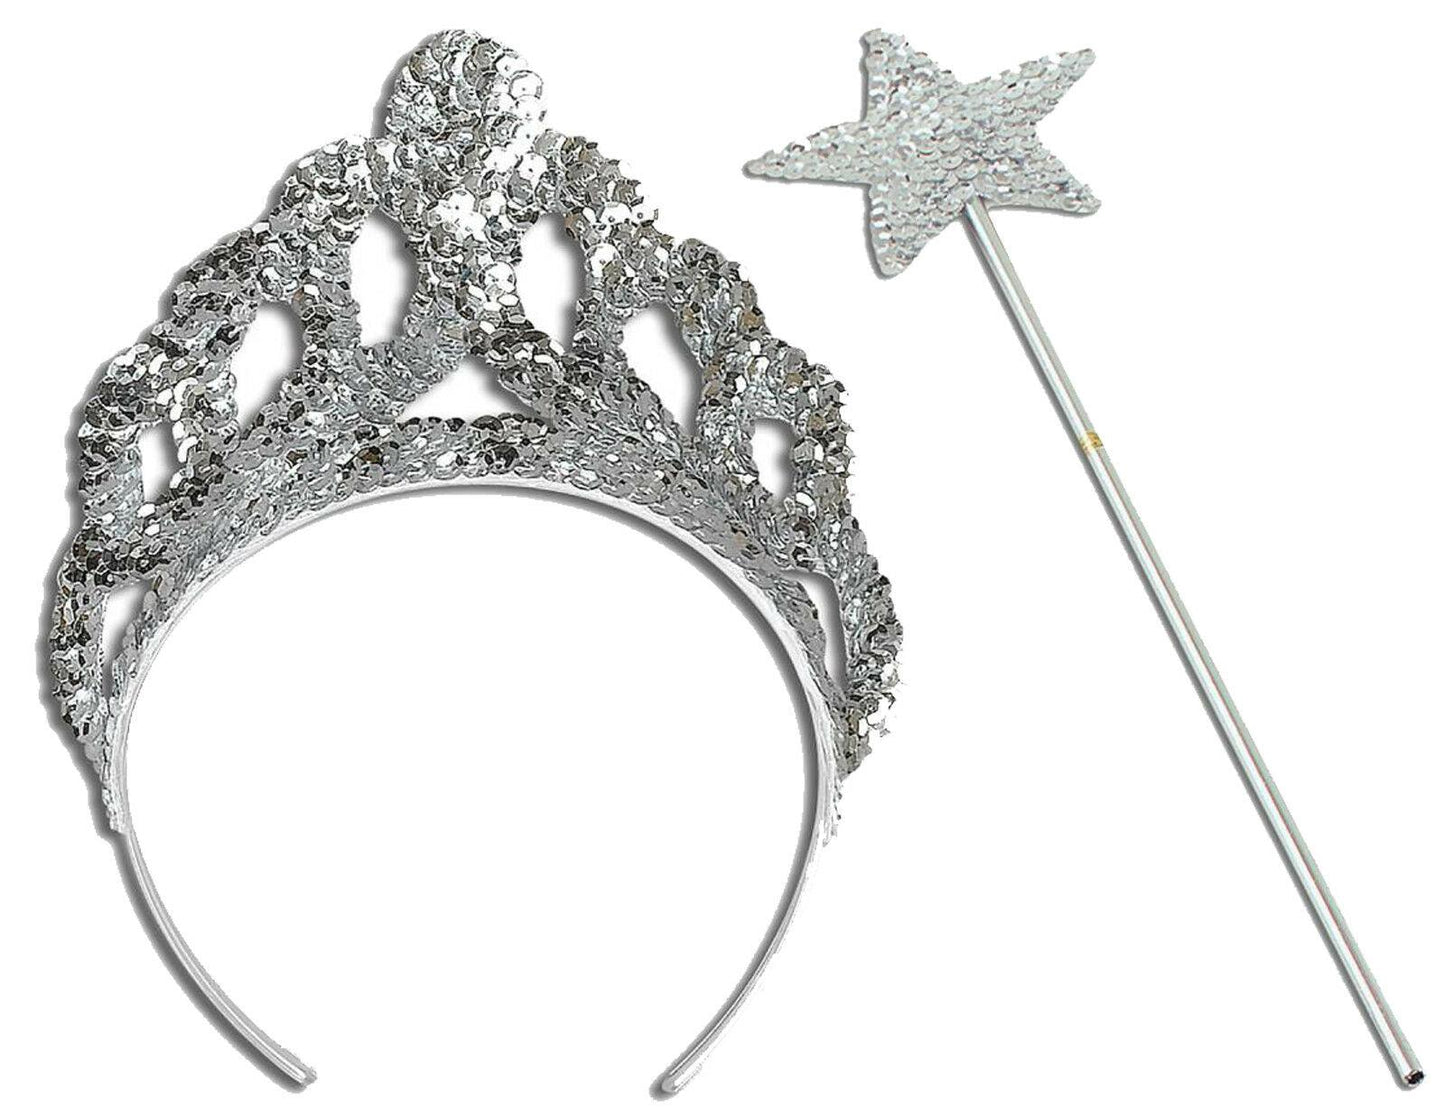 Ladies Girls Silver Tiara & Wand Princess Crown Christmas Party Accessories Set - Labreeze